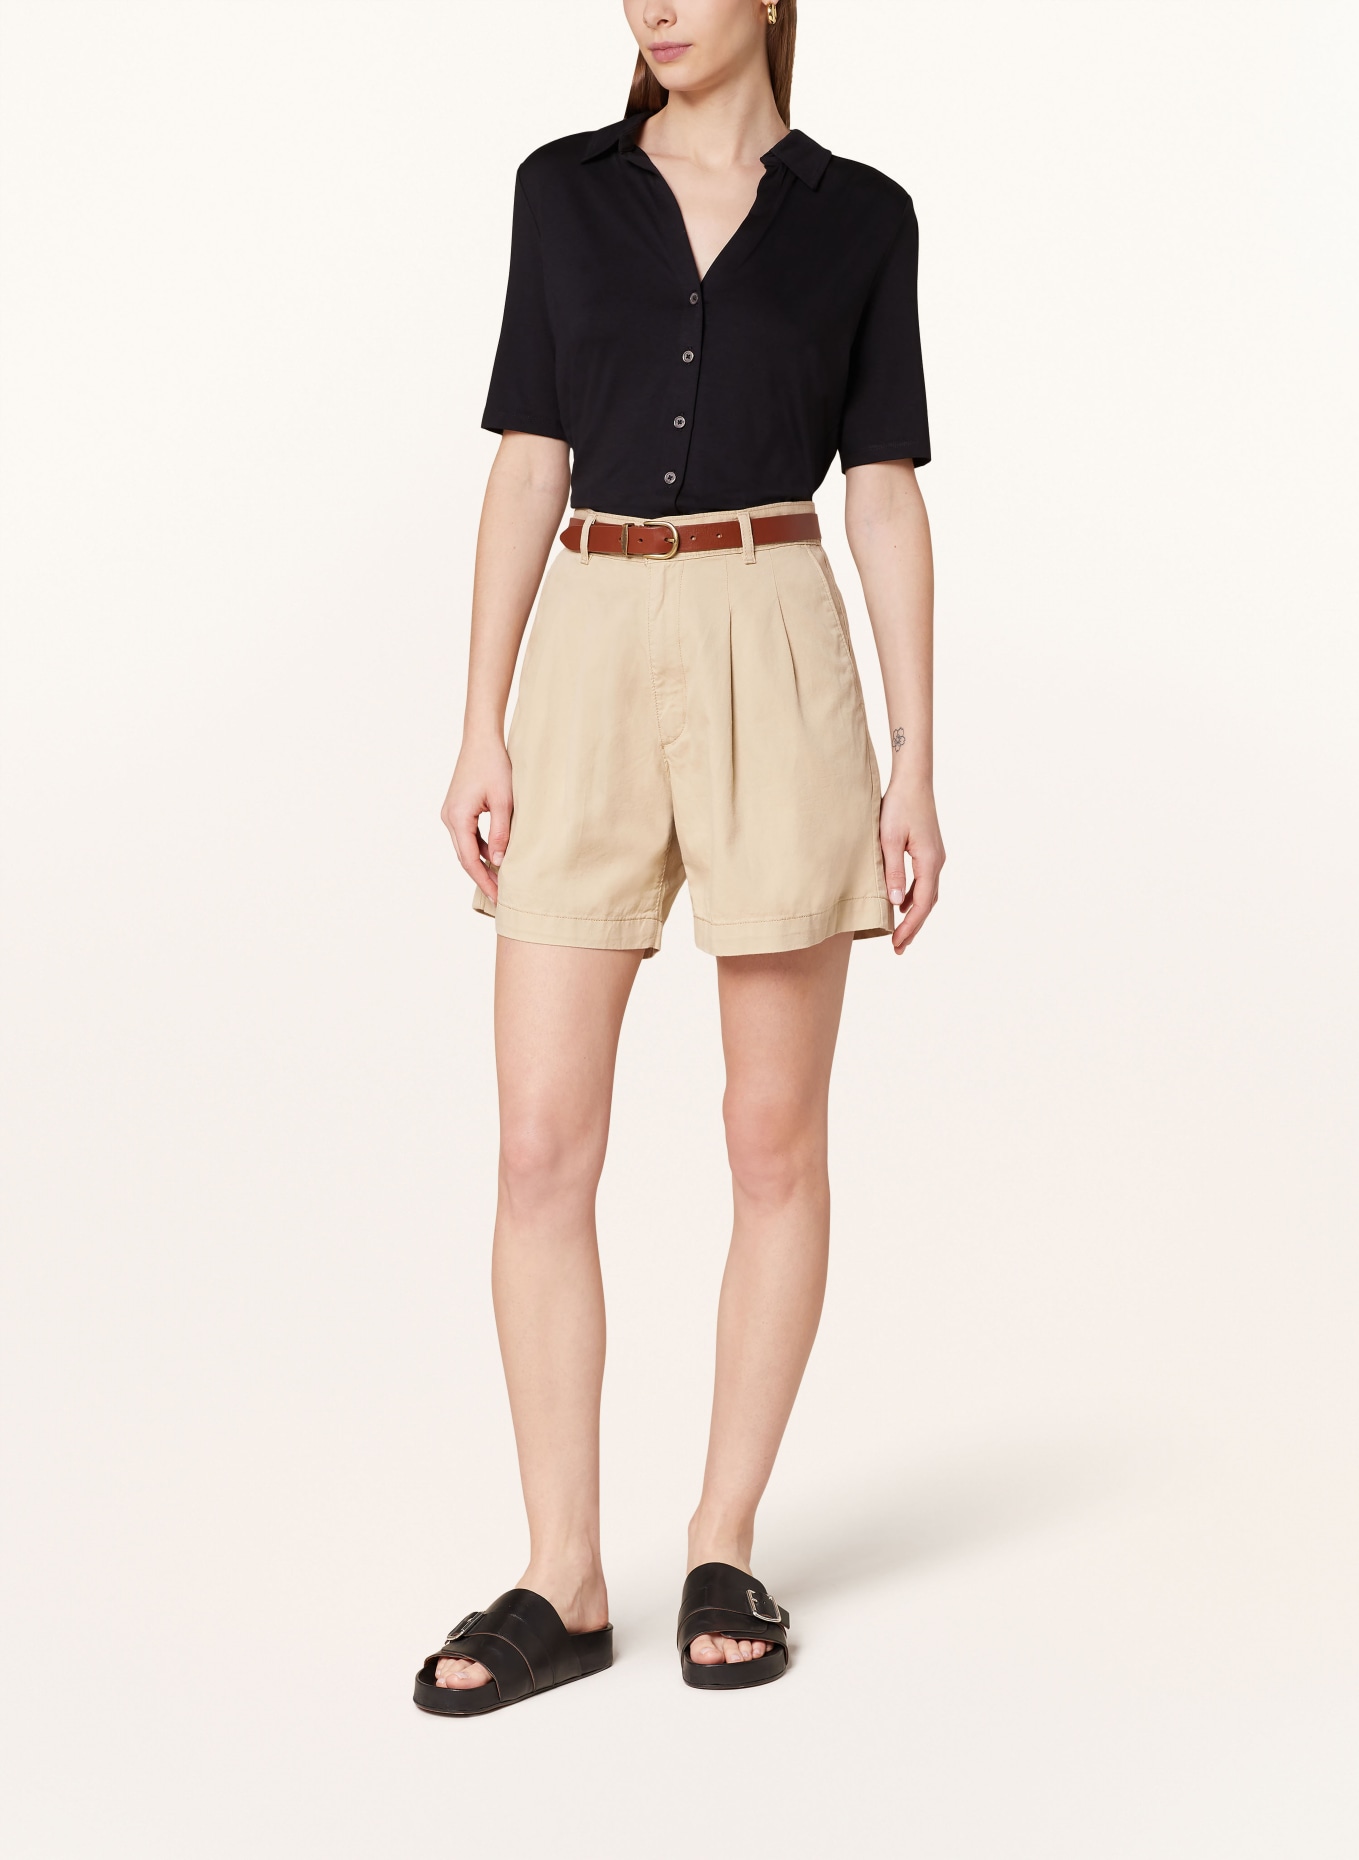 Marc O'Polo Shirt blouse made of jersey, Color: BLACK (Image 2)